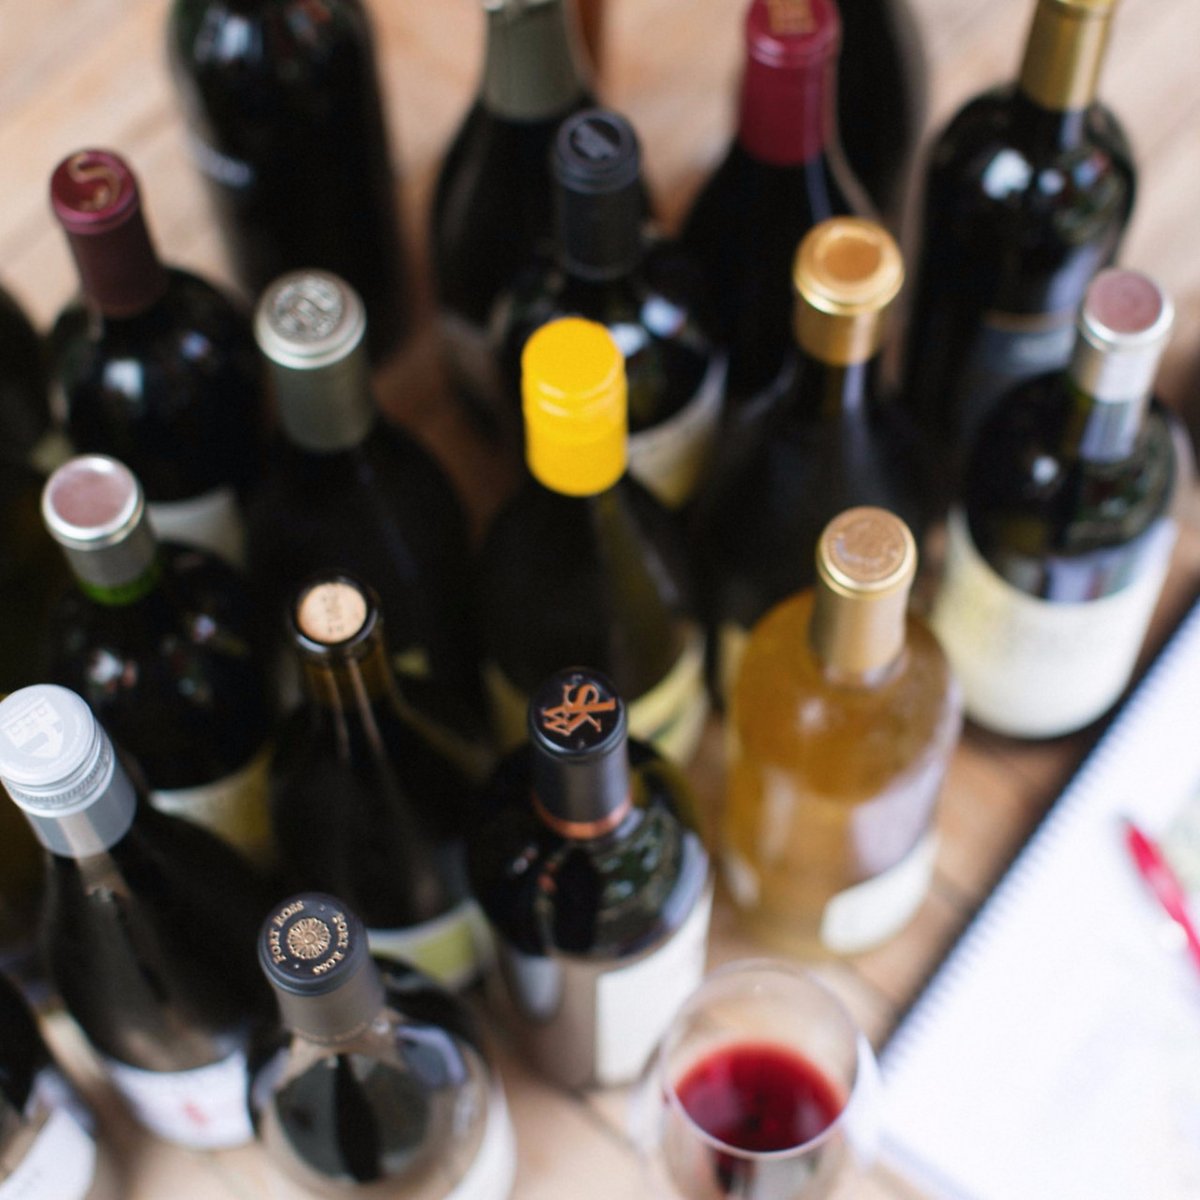 How Restaurant Wine Buyers Make Their Selections (or Should)